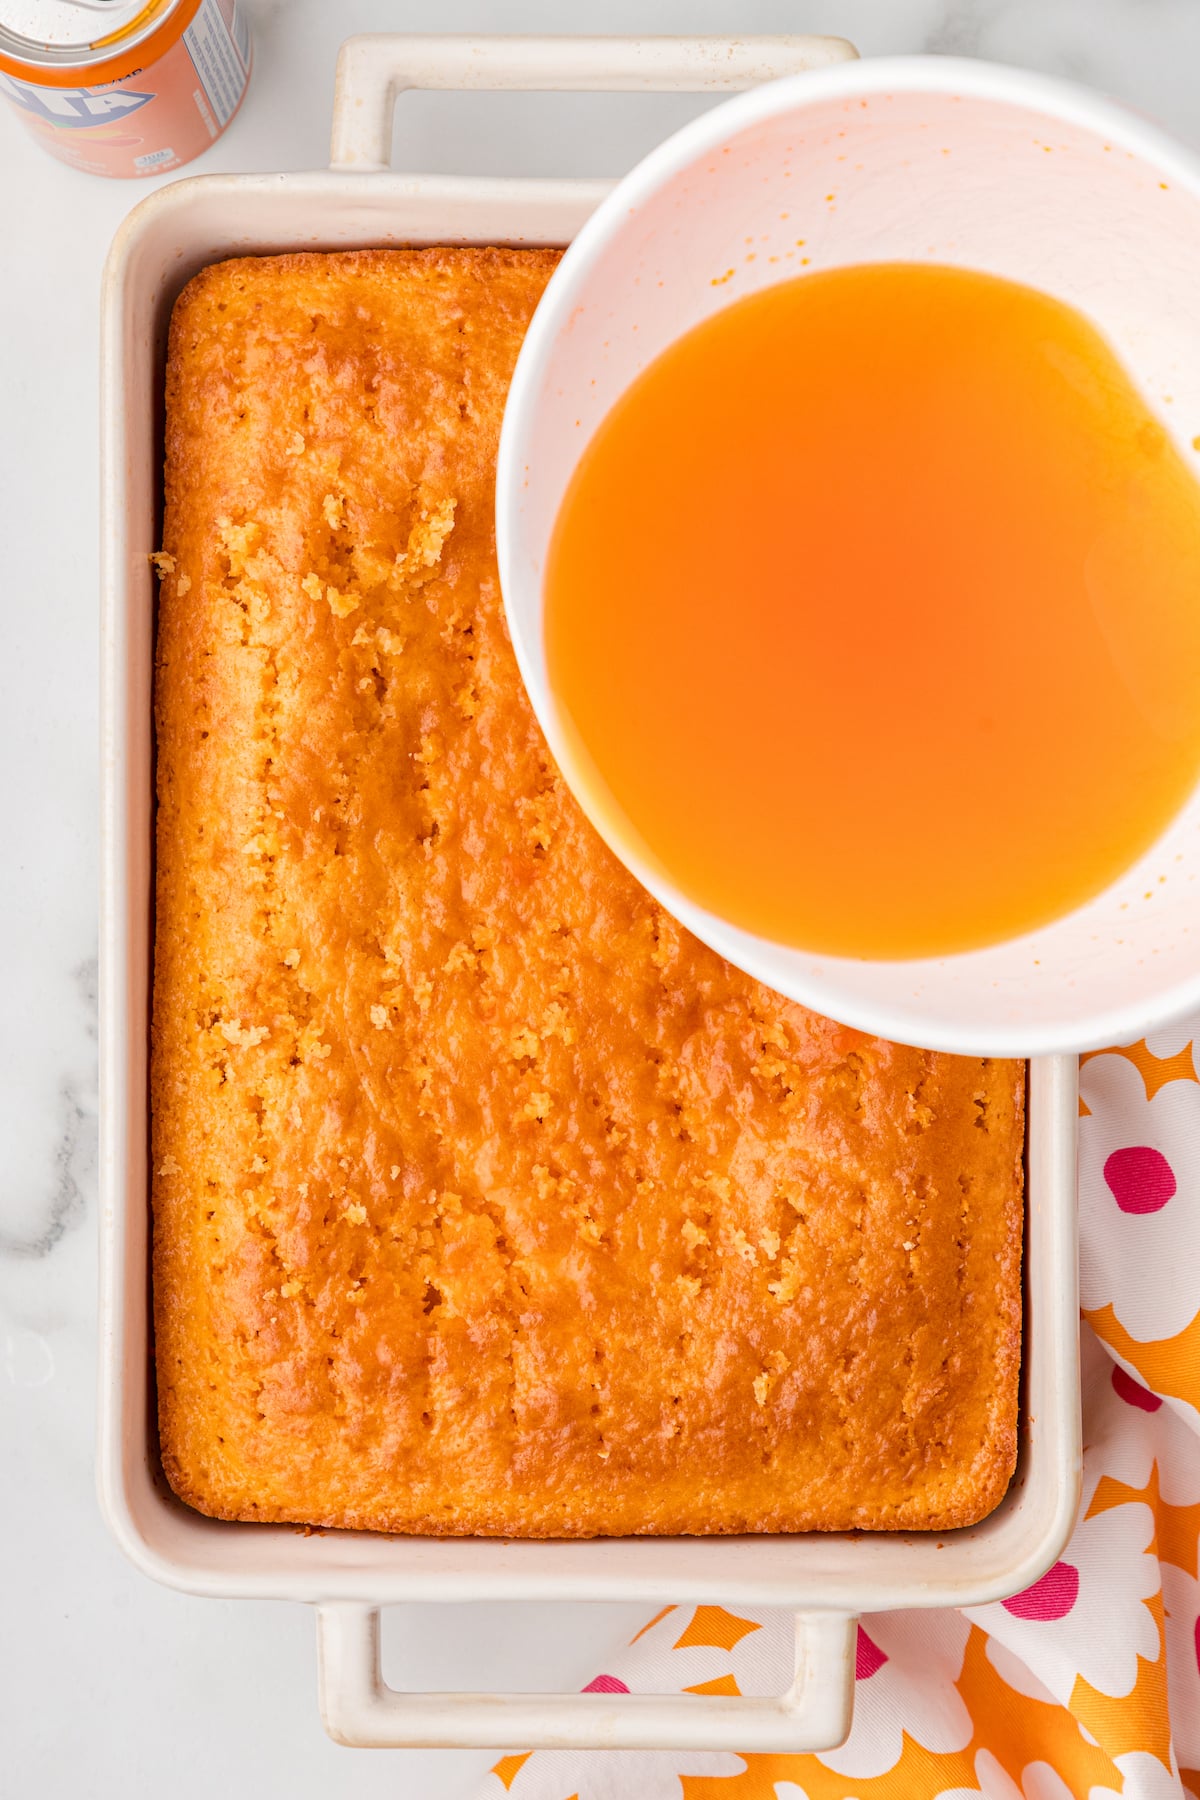 pour the orange jello over the cake that has been poked full of holes